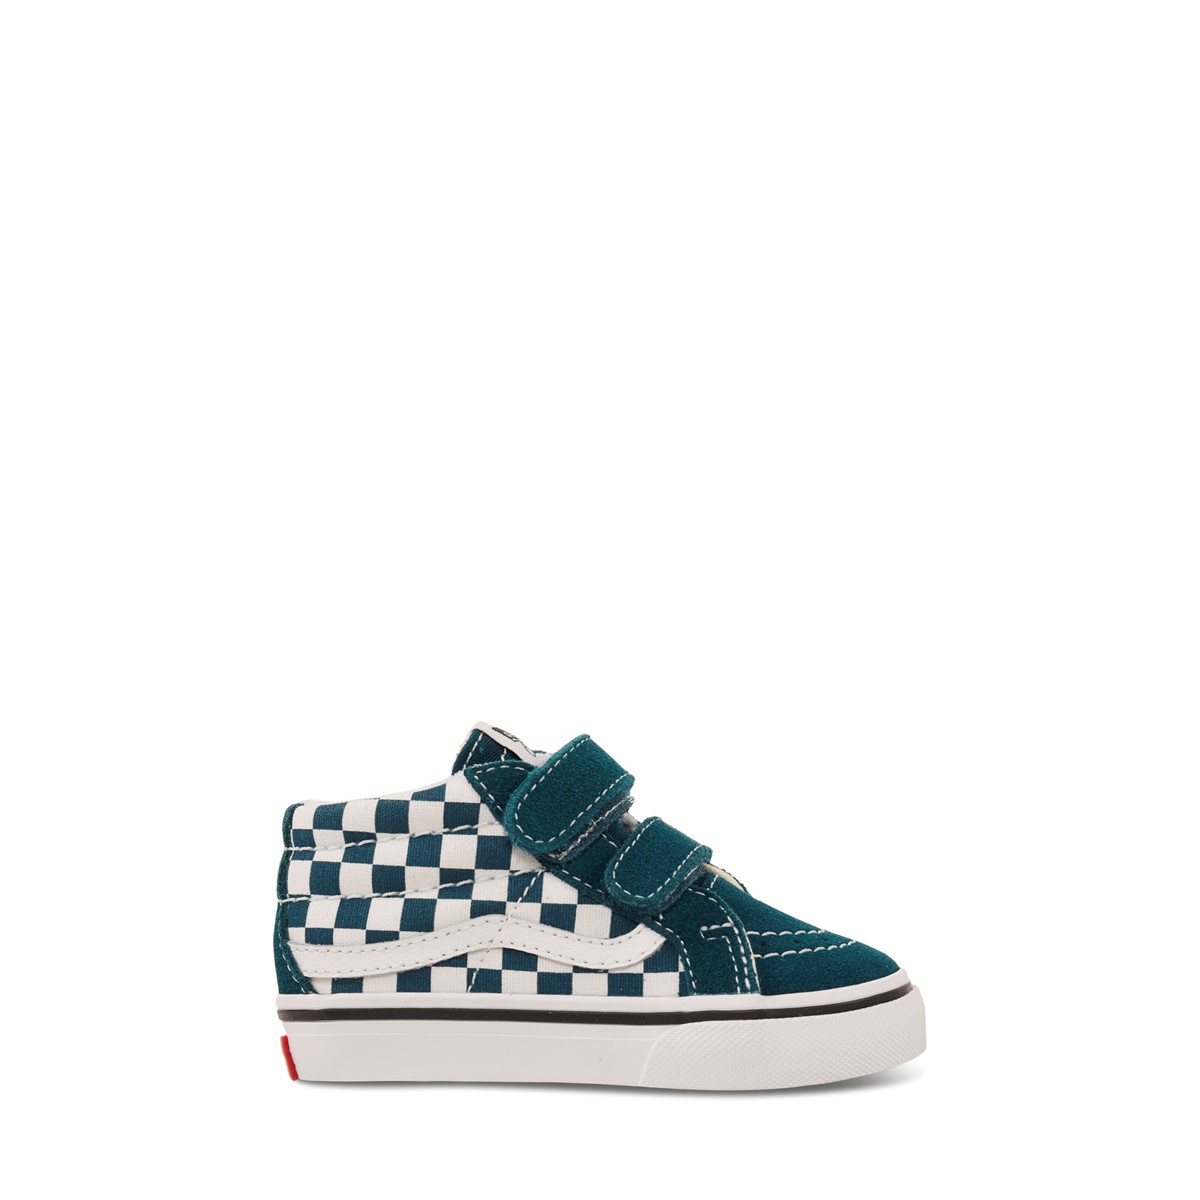 Toddler's Checkerboard Sk8 Mid Reissue V Sneakers in Teal/White